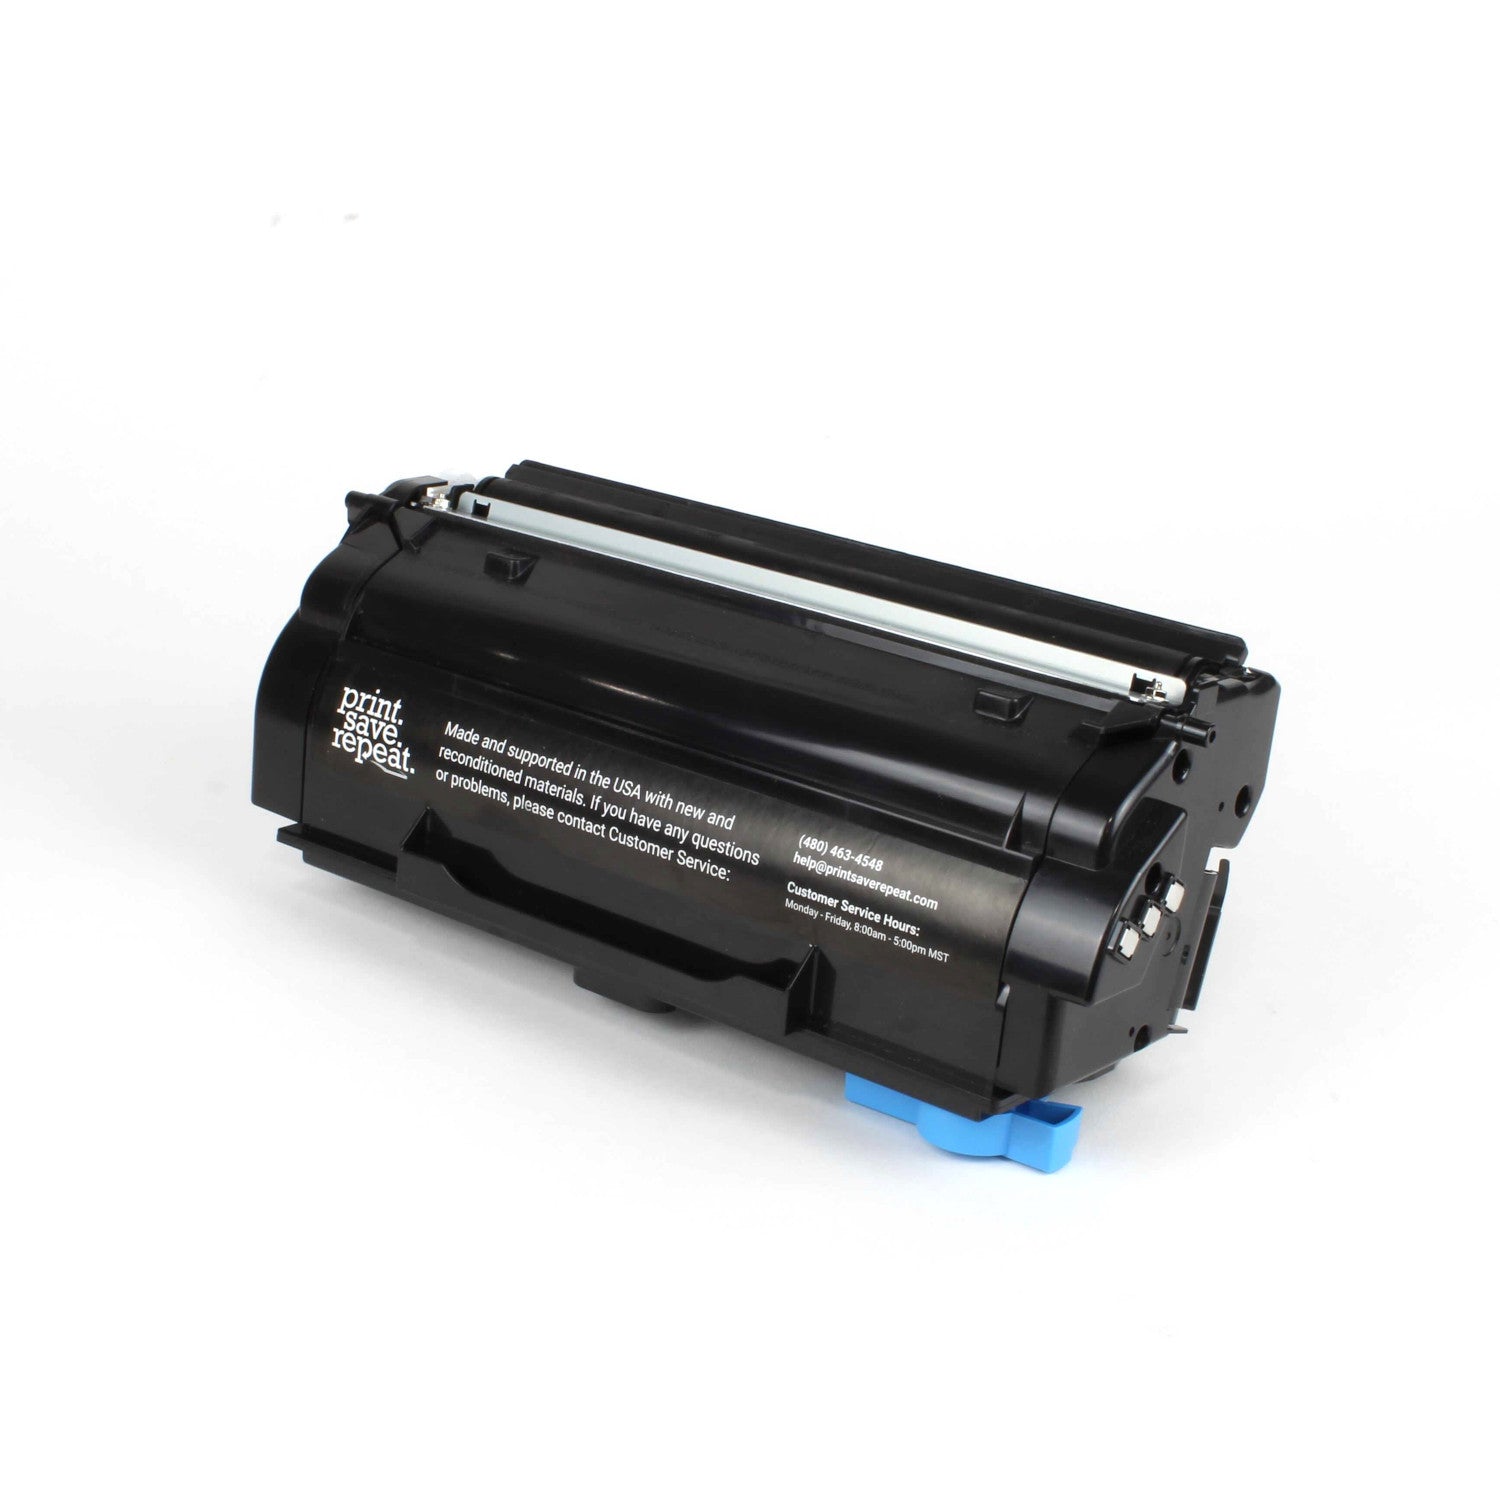 Print.Save.Repeat. Lexmark 55B1X00 Extra High Yield Remanufactured Toner Cartridge for MS431, MX431 [20,000 Pages]